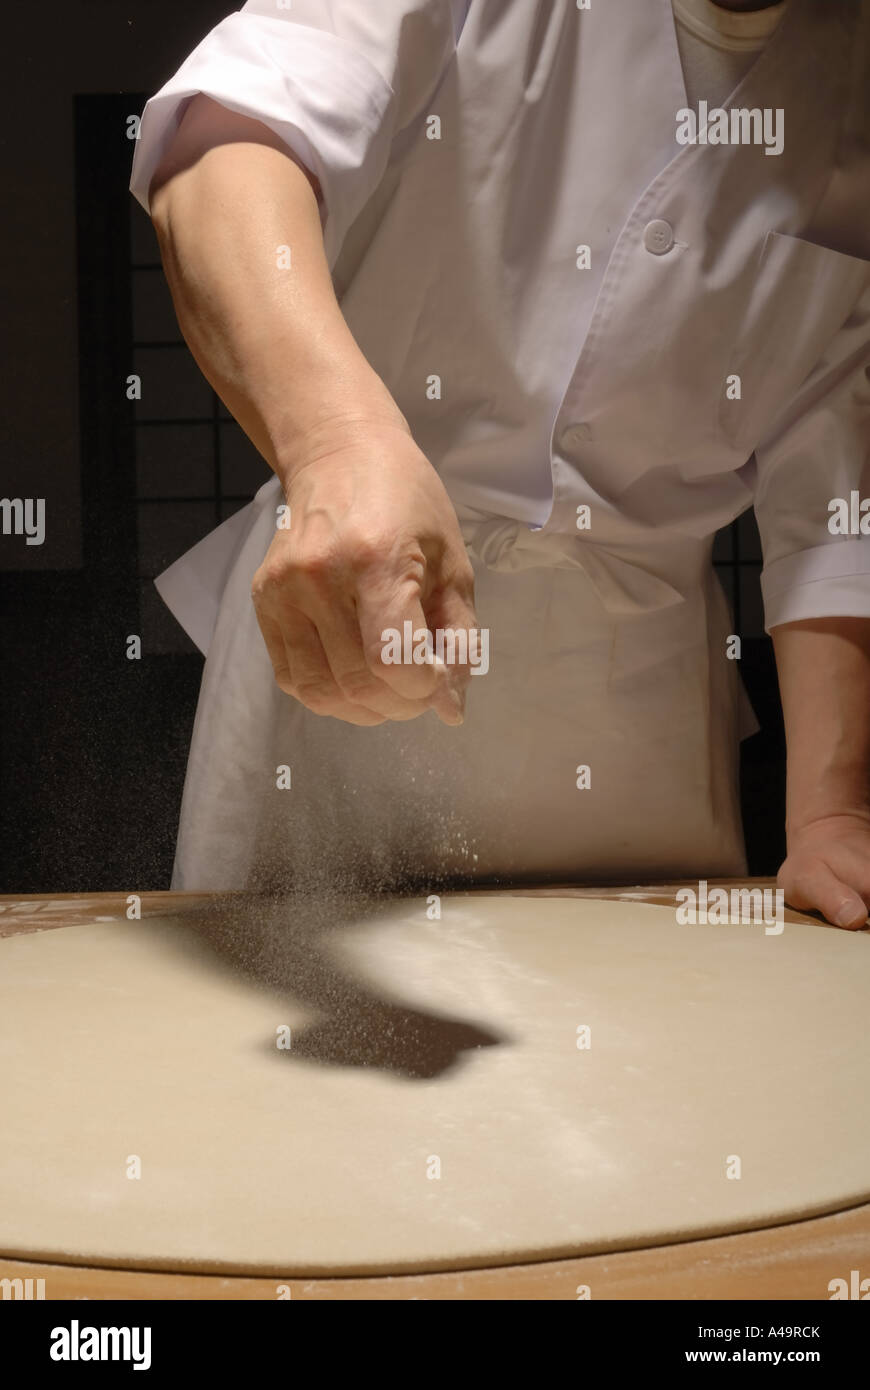 Mid section view of a chef spreading flour on rolled dough Stock Photo